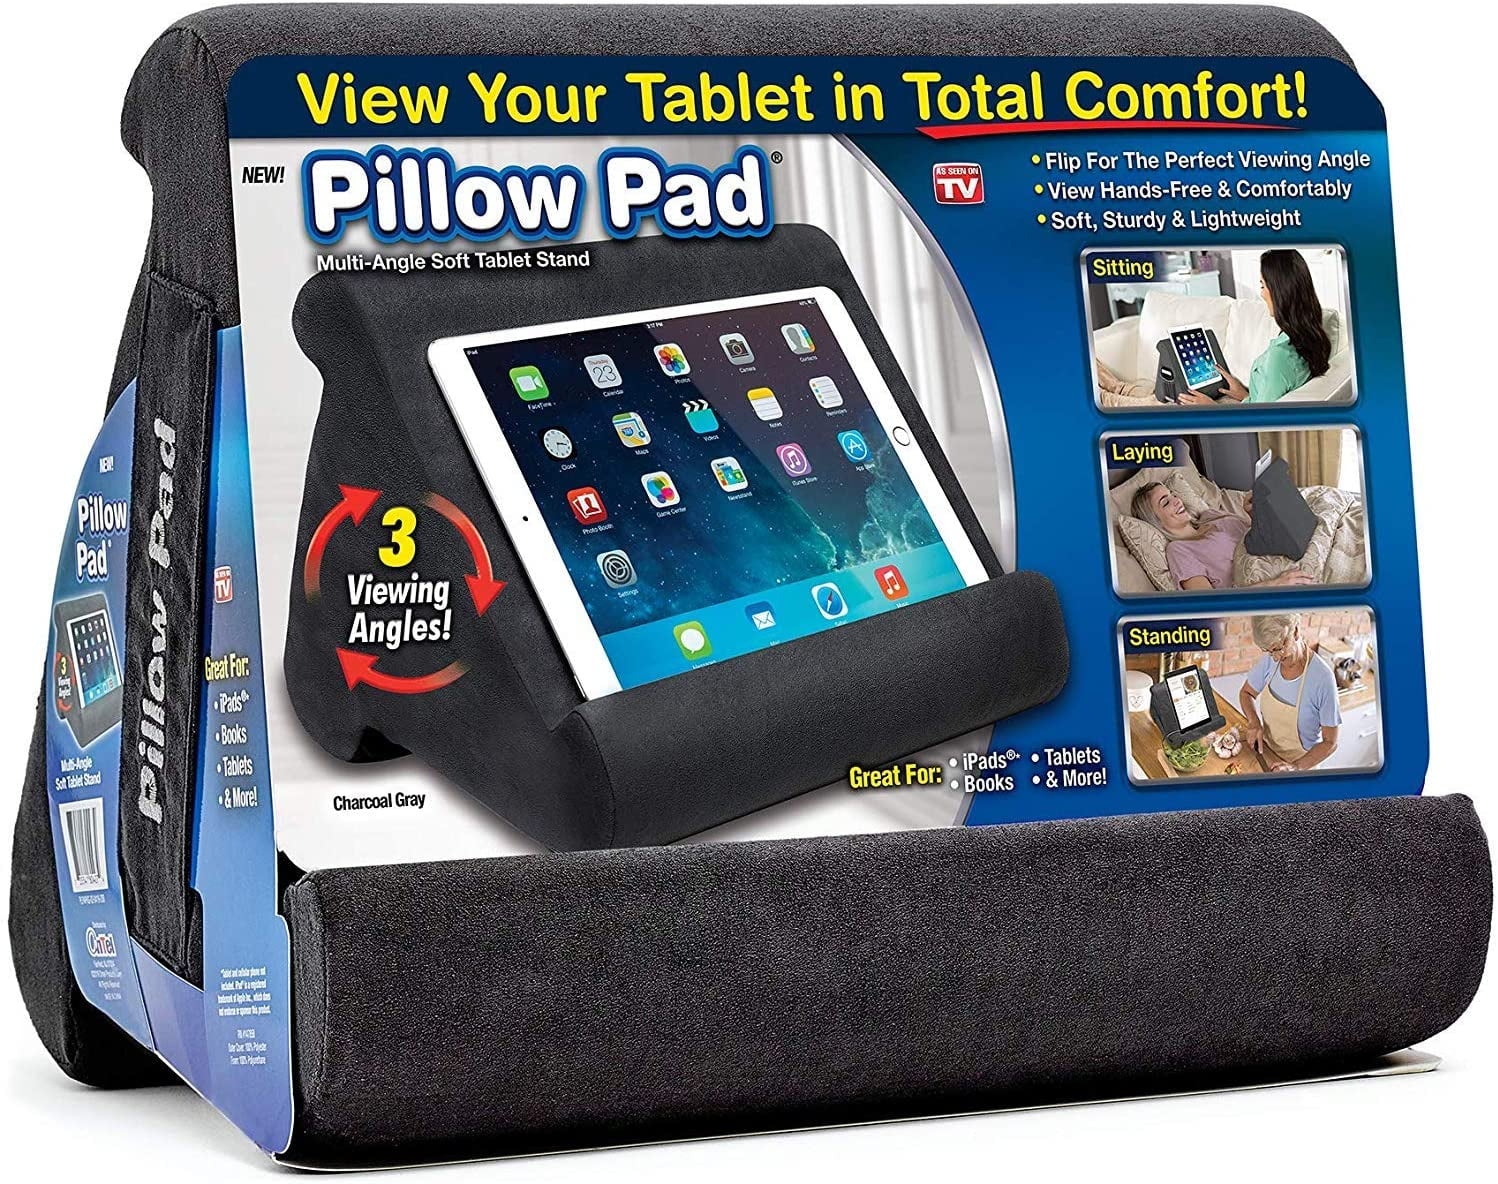 Ontel Pillow Pad Multi-Angle Soft Tablet Stand Charcoal Grey 